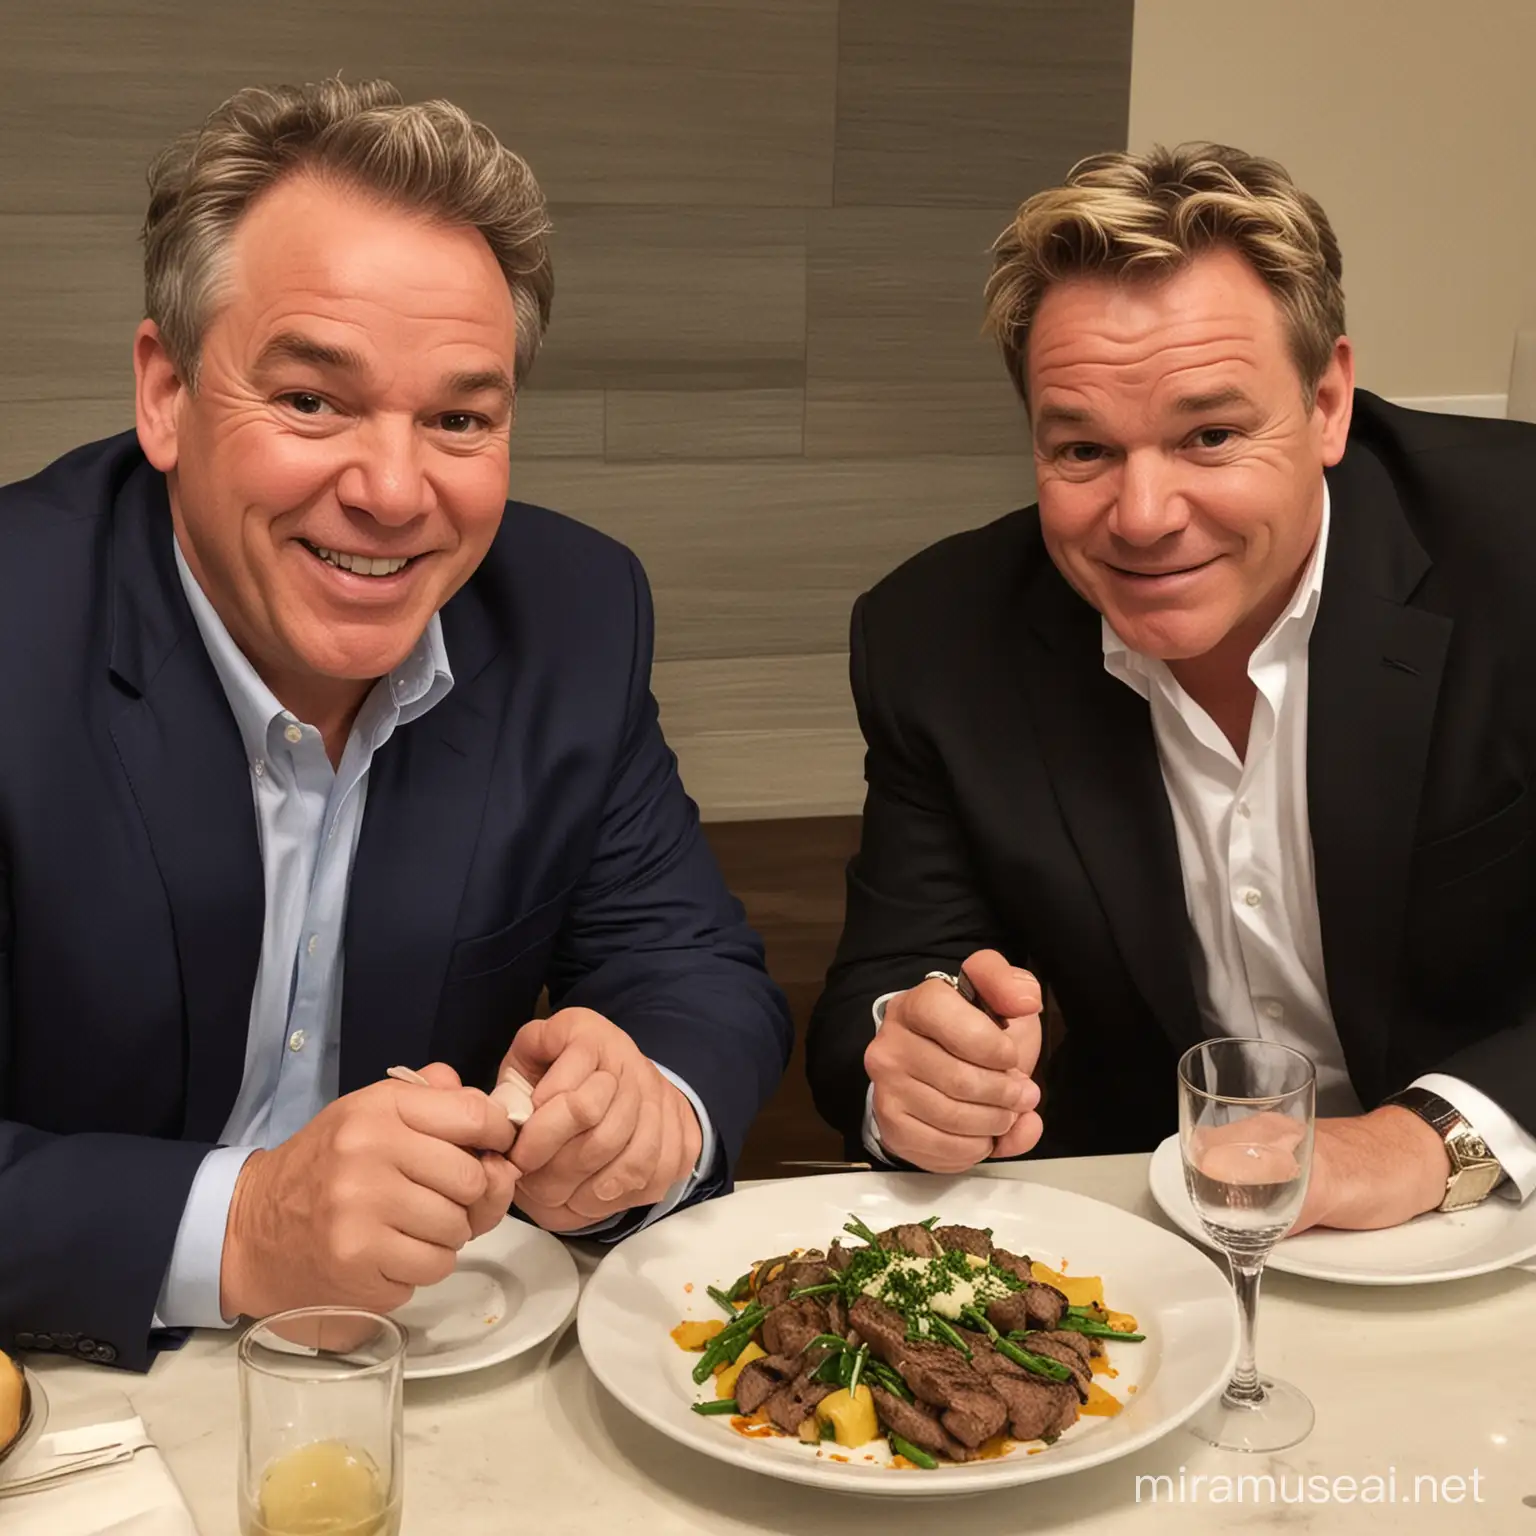 R.C. Sproul and Gordon Ramsay having dinner together.